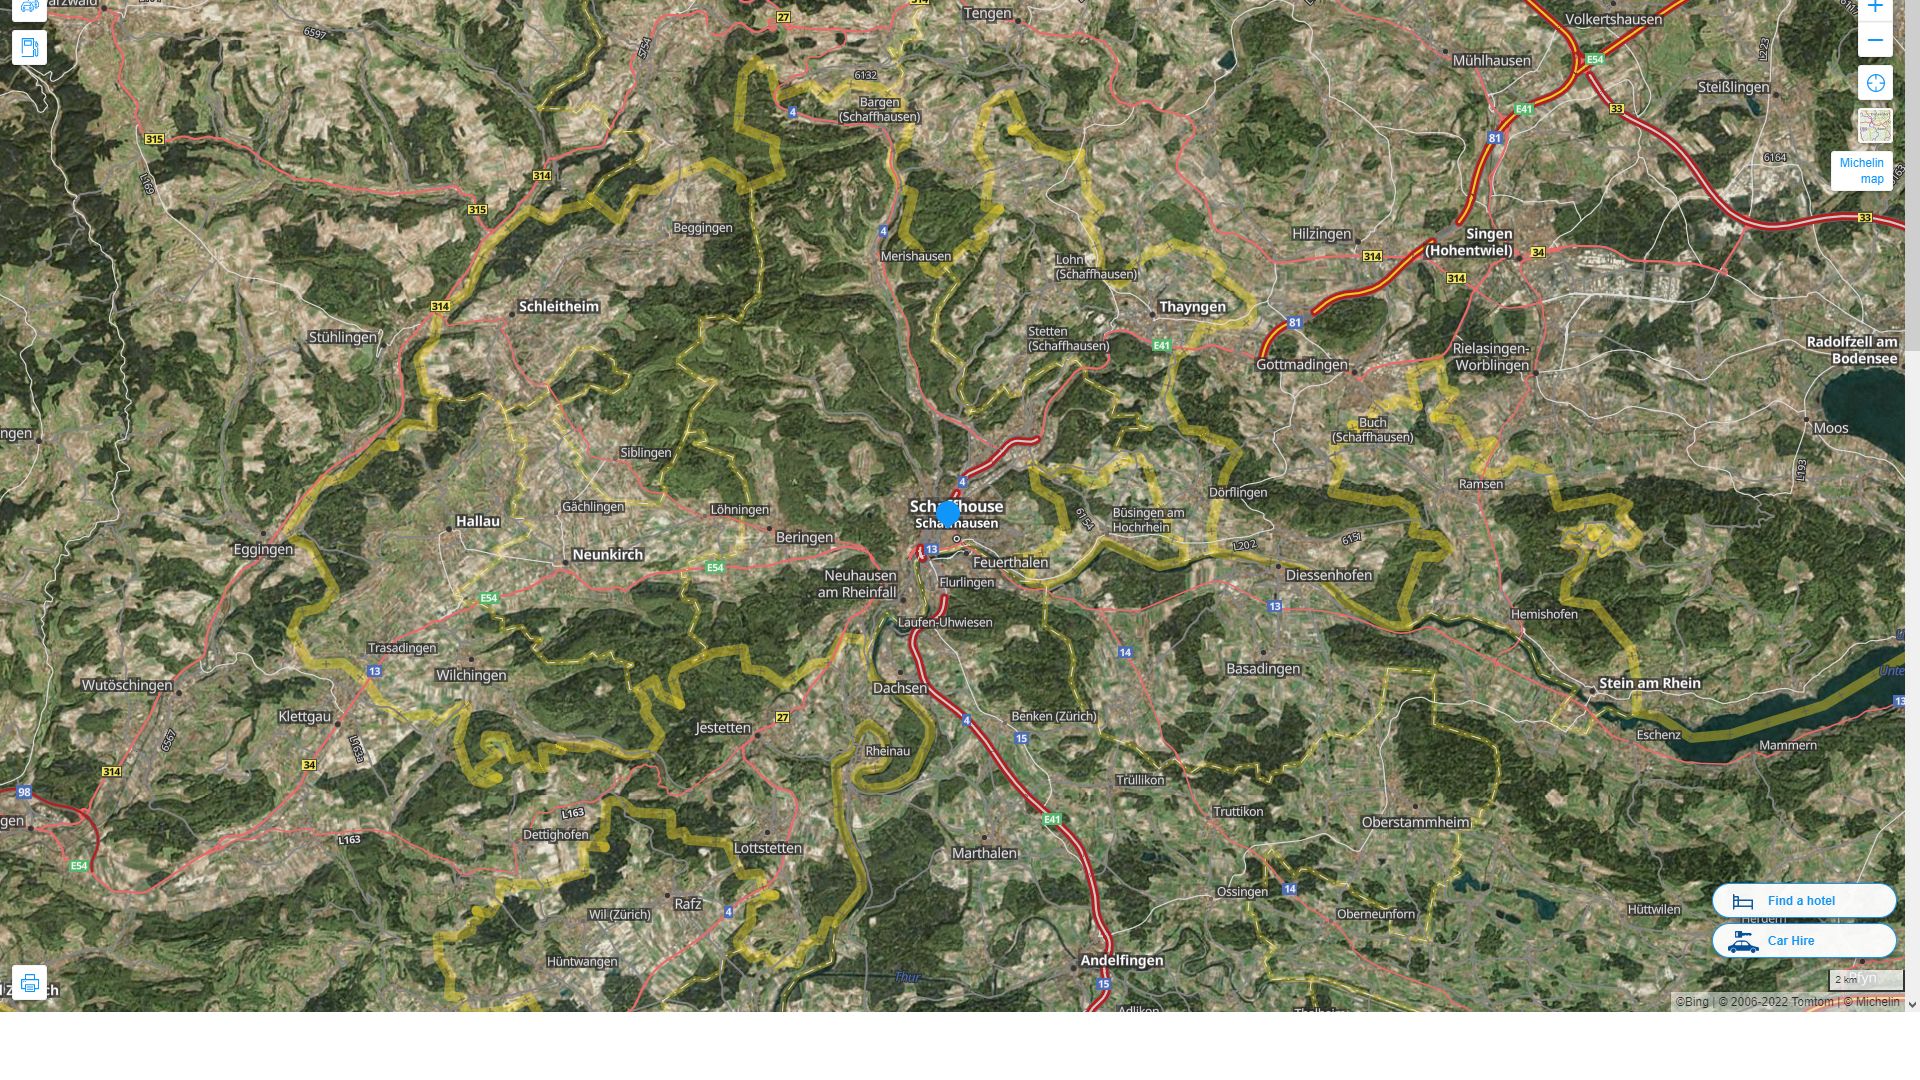 Schaffhausen Highway and Road Map with Satellite View